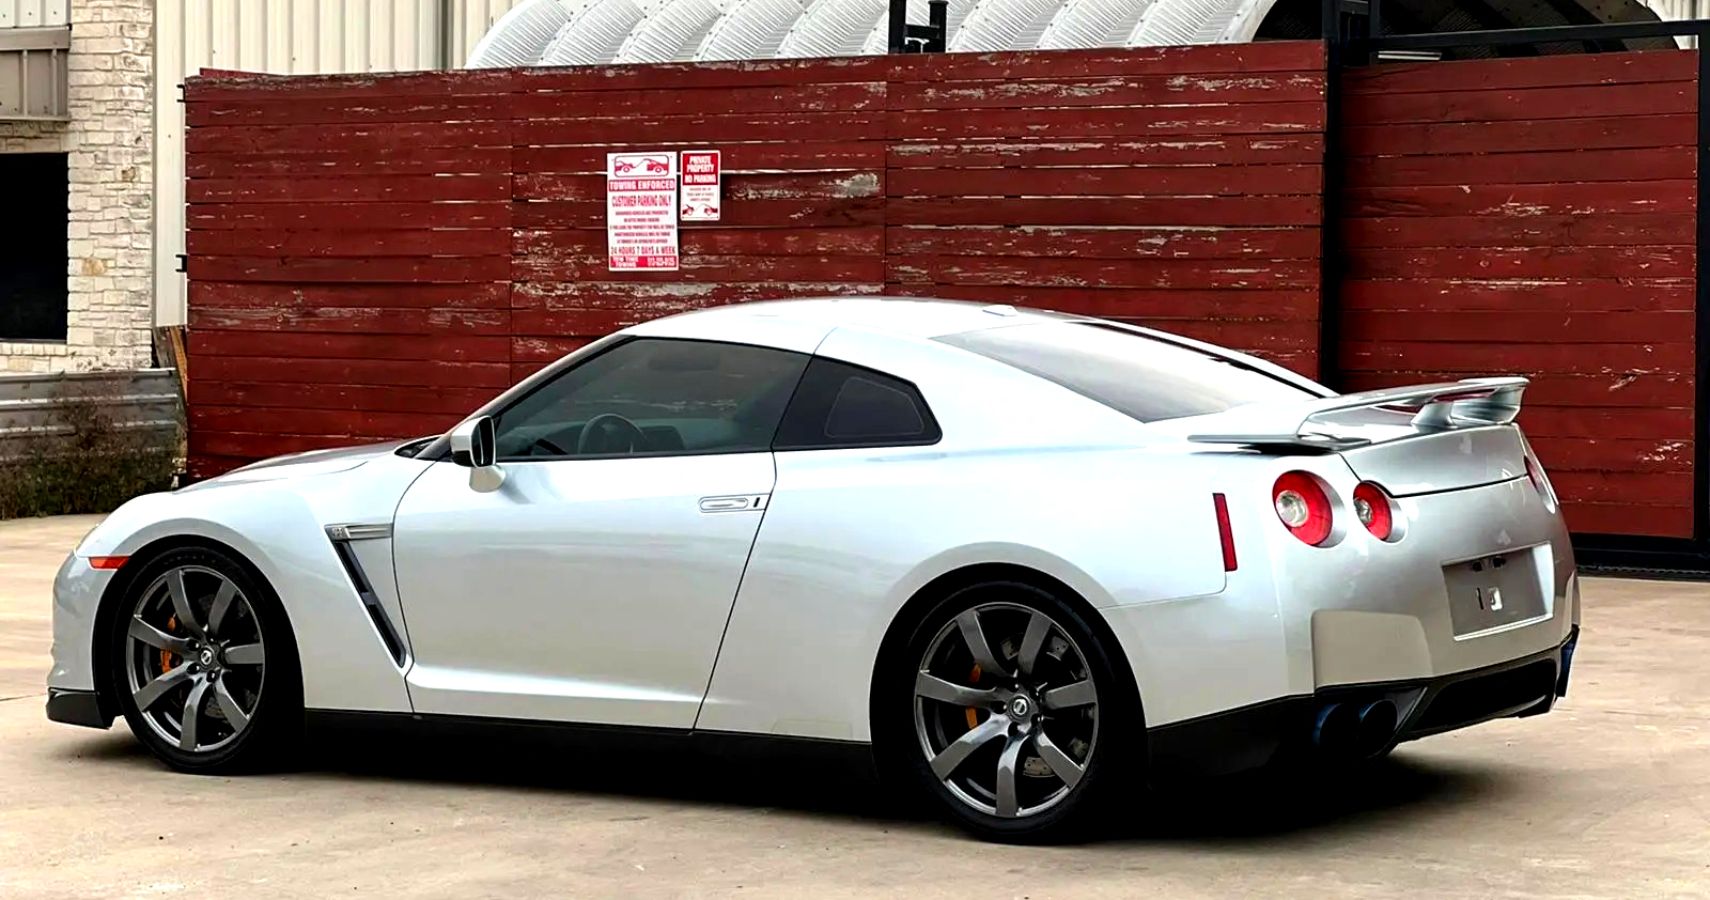 2010 Nissan GT-R Exterior Side Angle